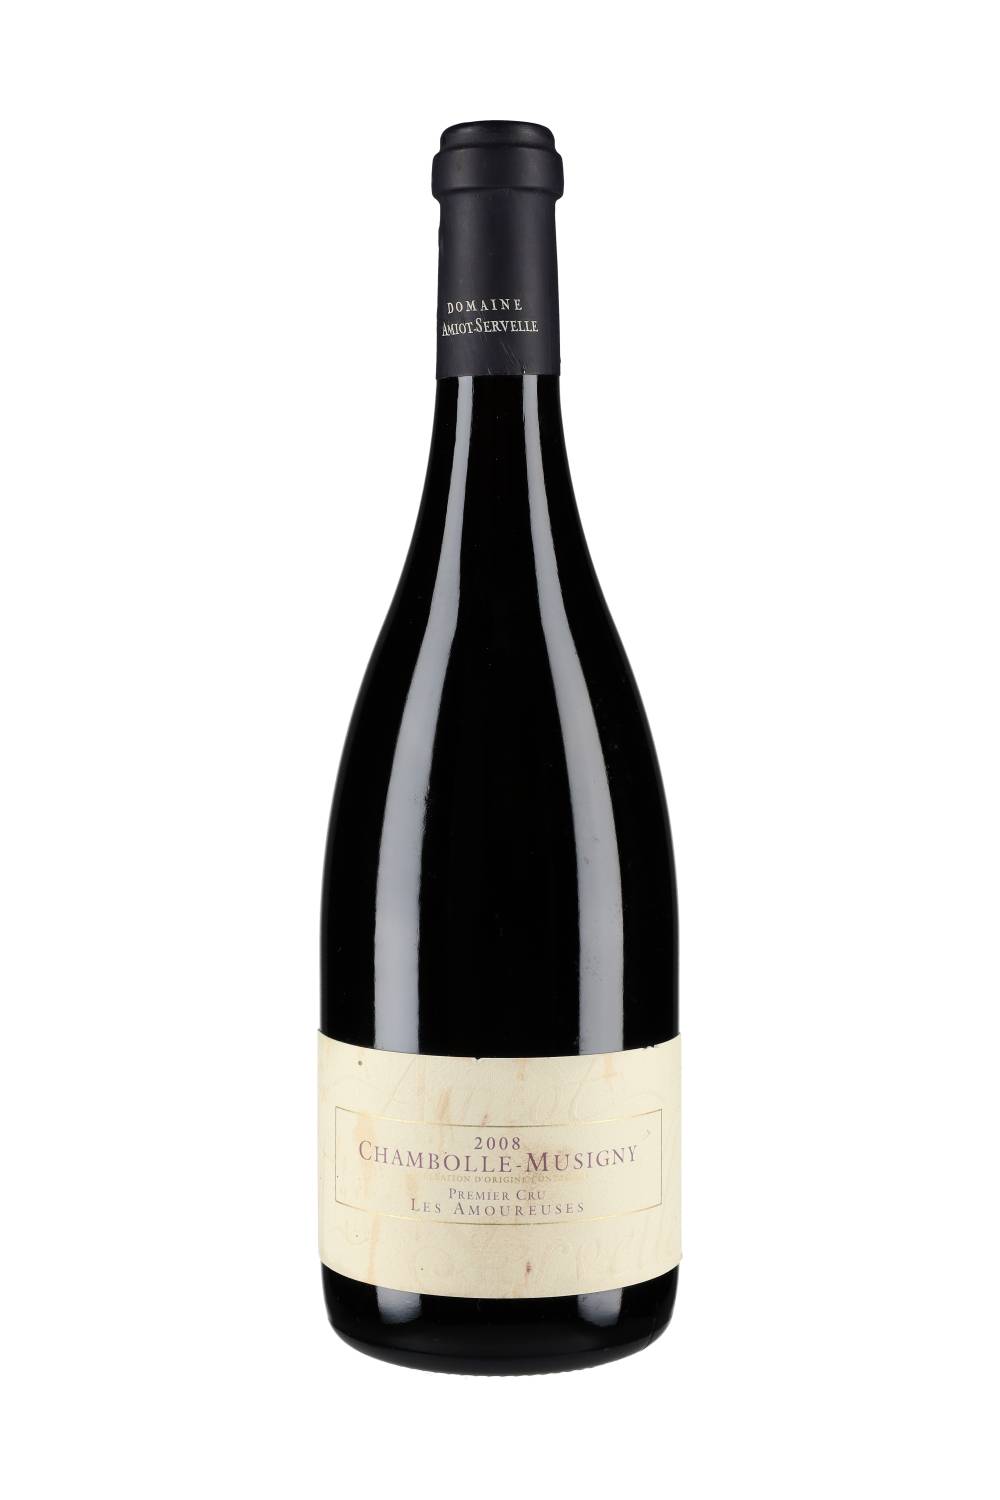 Domaine Amiot-Servelle Chambolle-Musigny Premier Cru 'Les Amoureuses' 2008